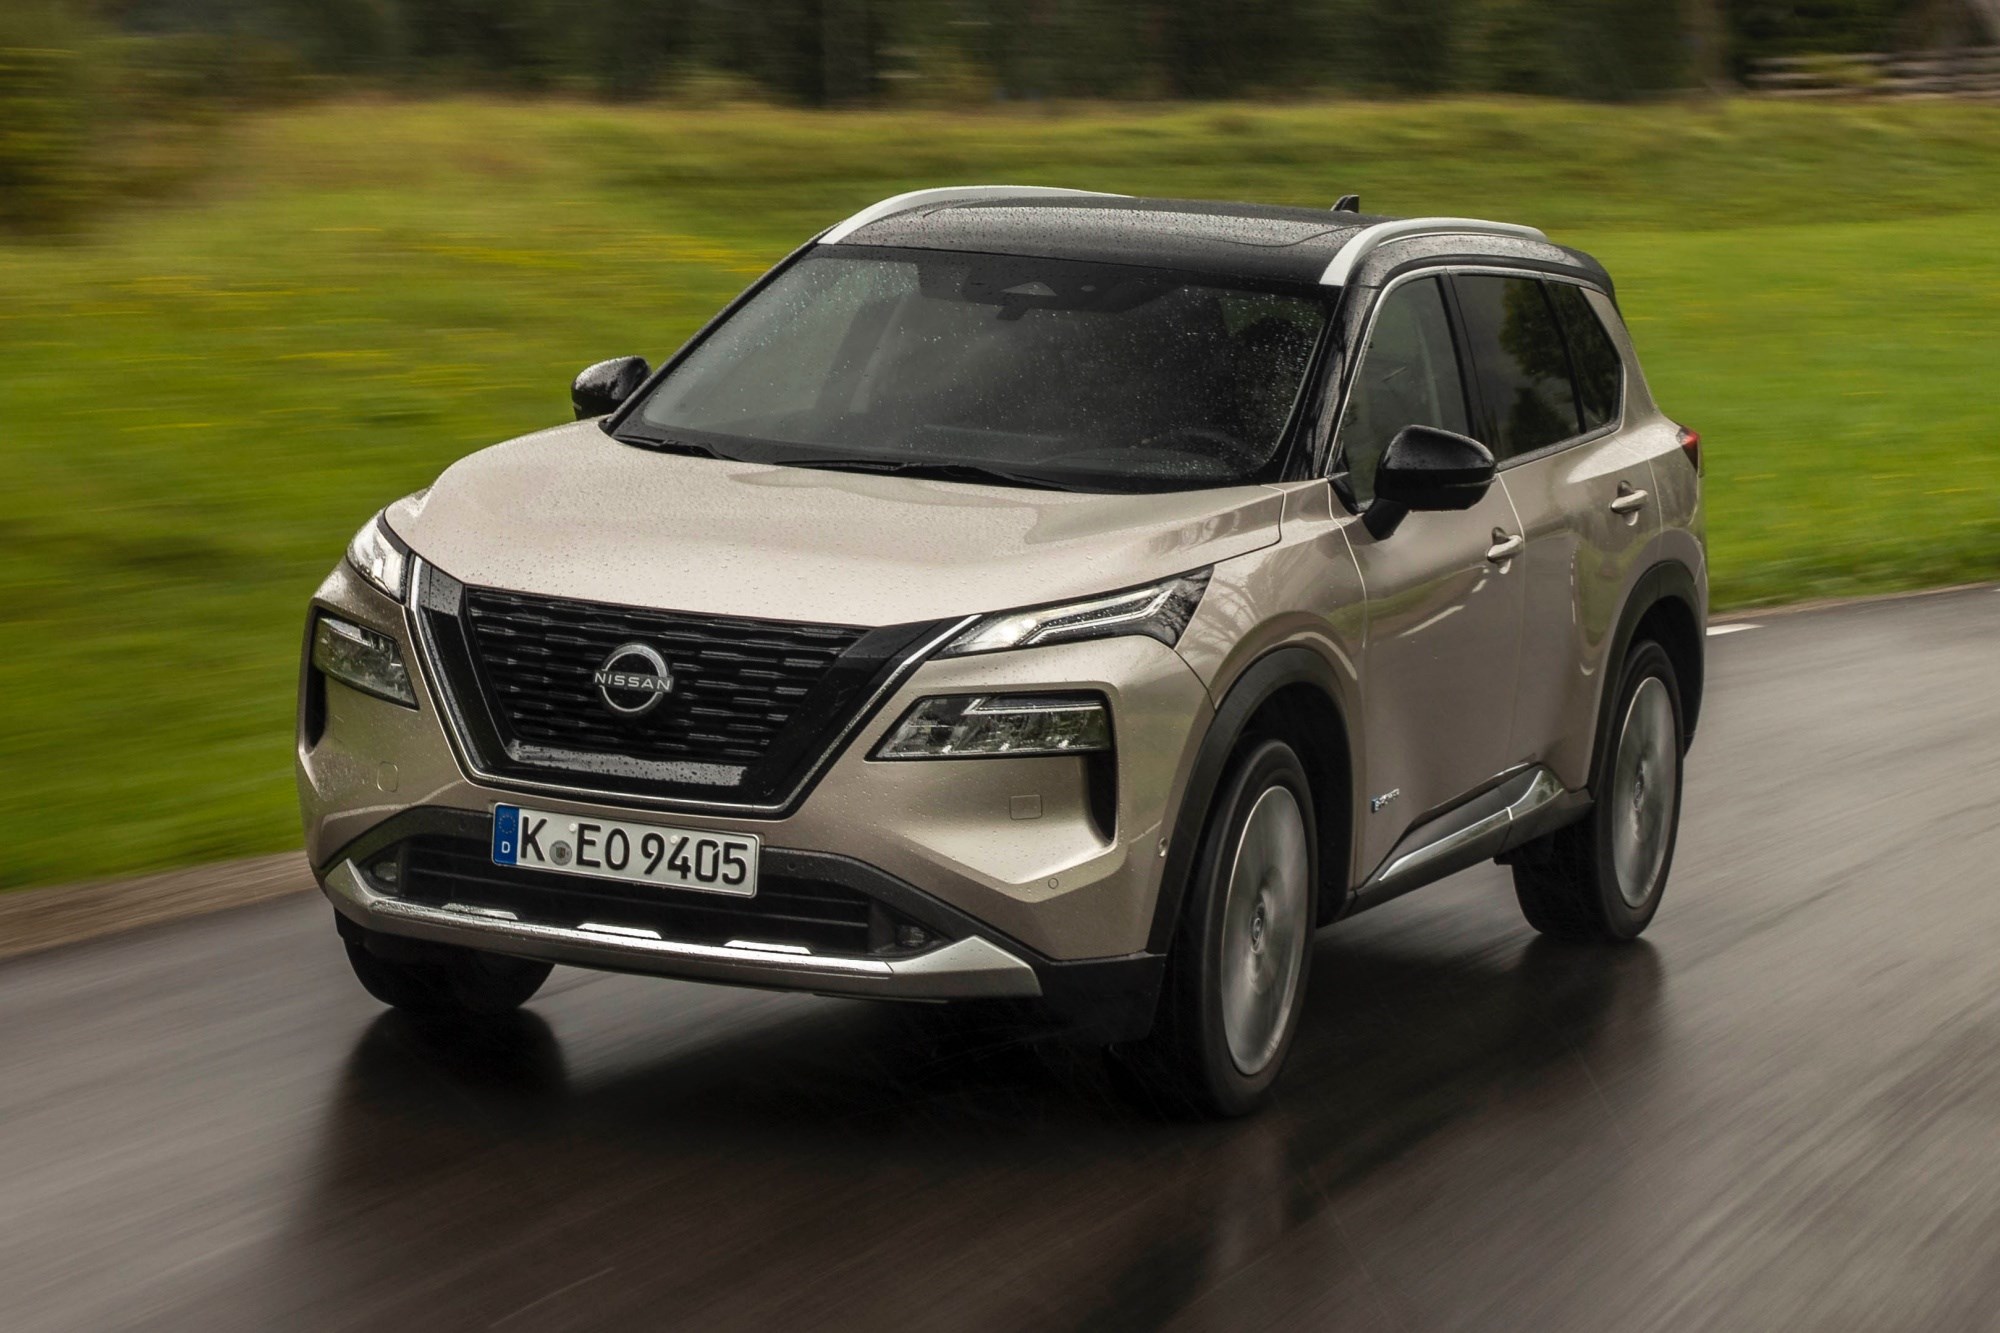 Nissan X-Trail (2017) review: Great value SUV gets premium updates